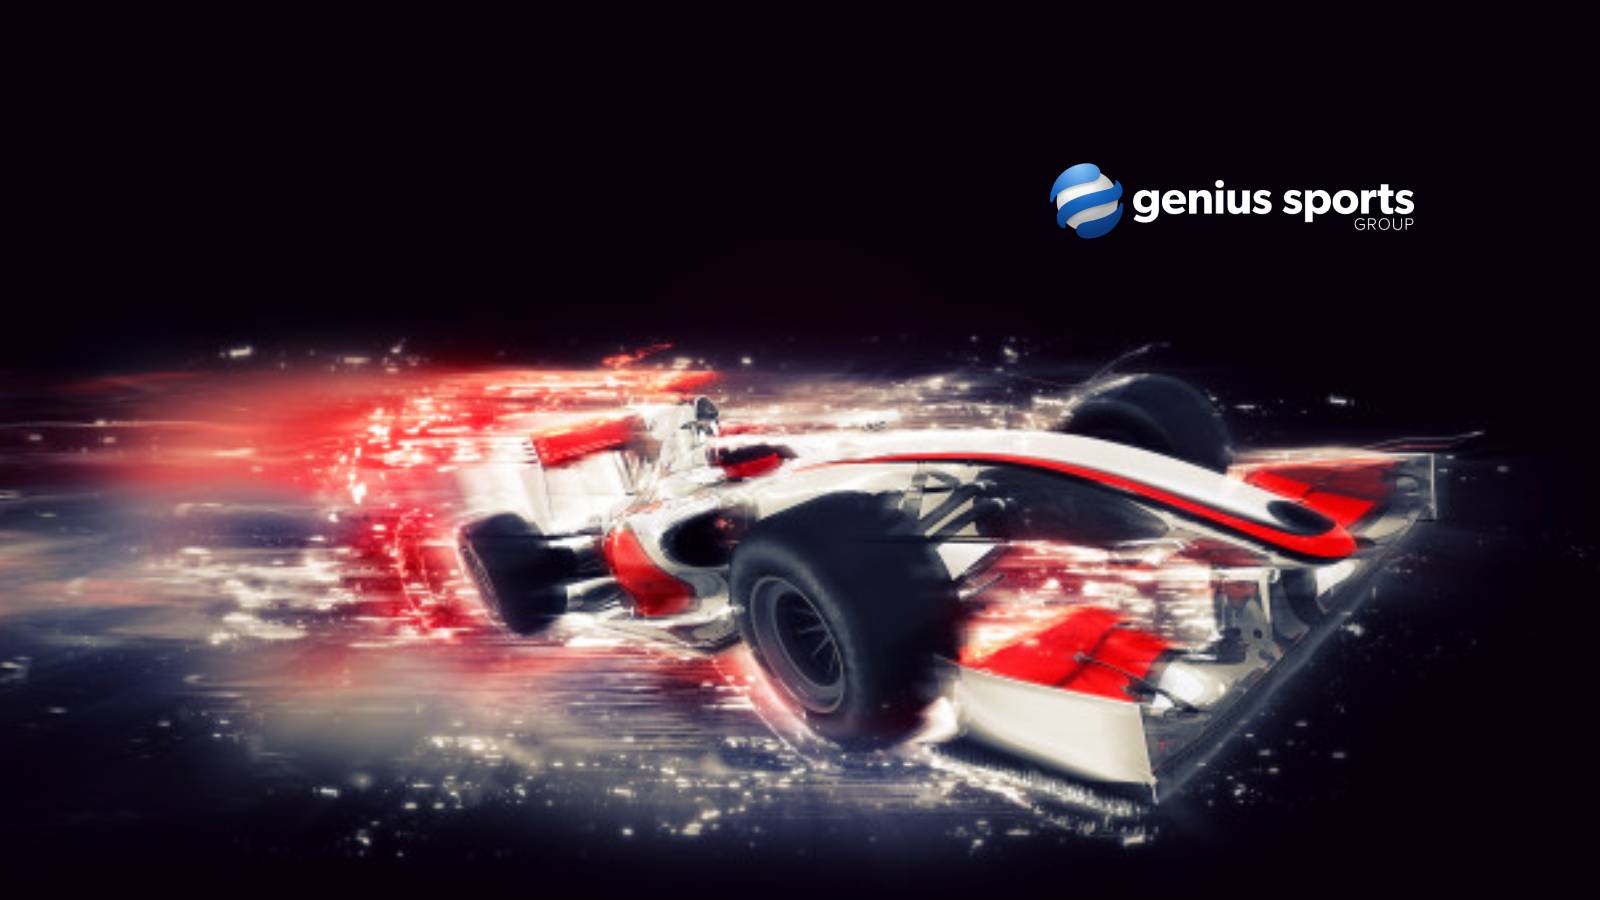 Superstar Racing Experience, Genius Sports Group Form Exclusive Official Data Partnership Ahead of Betting Launch